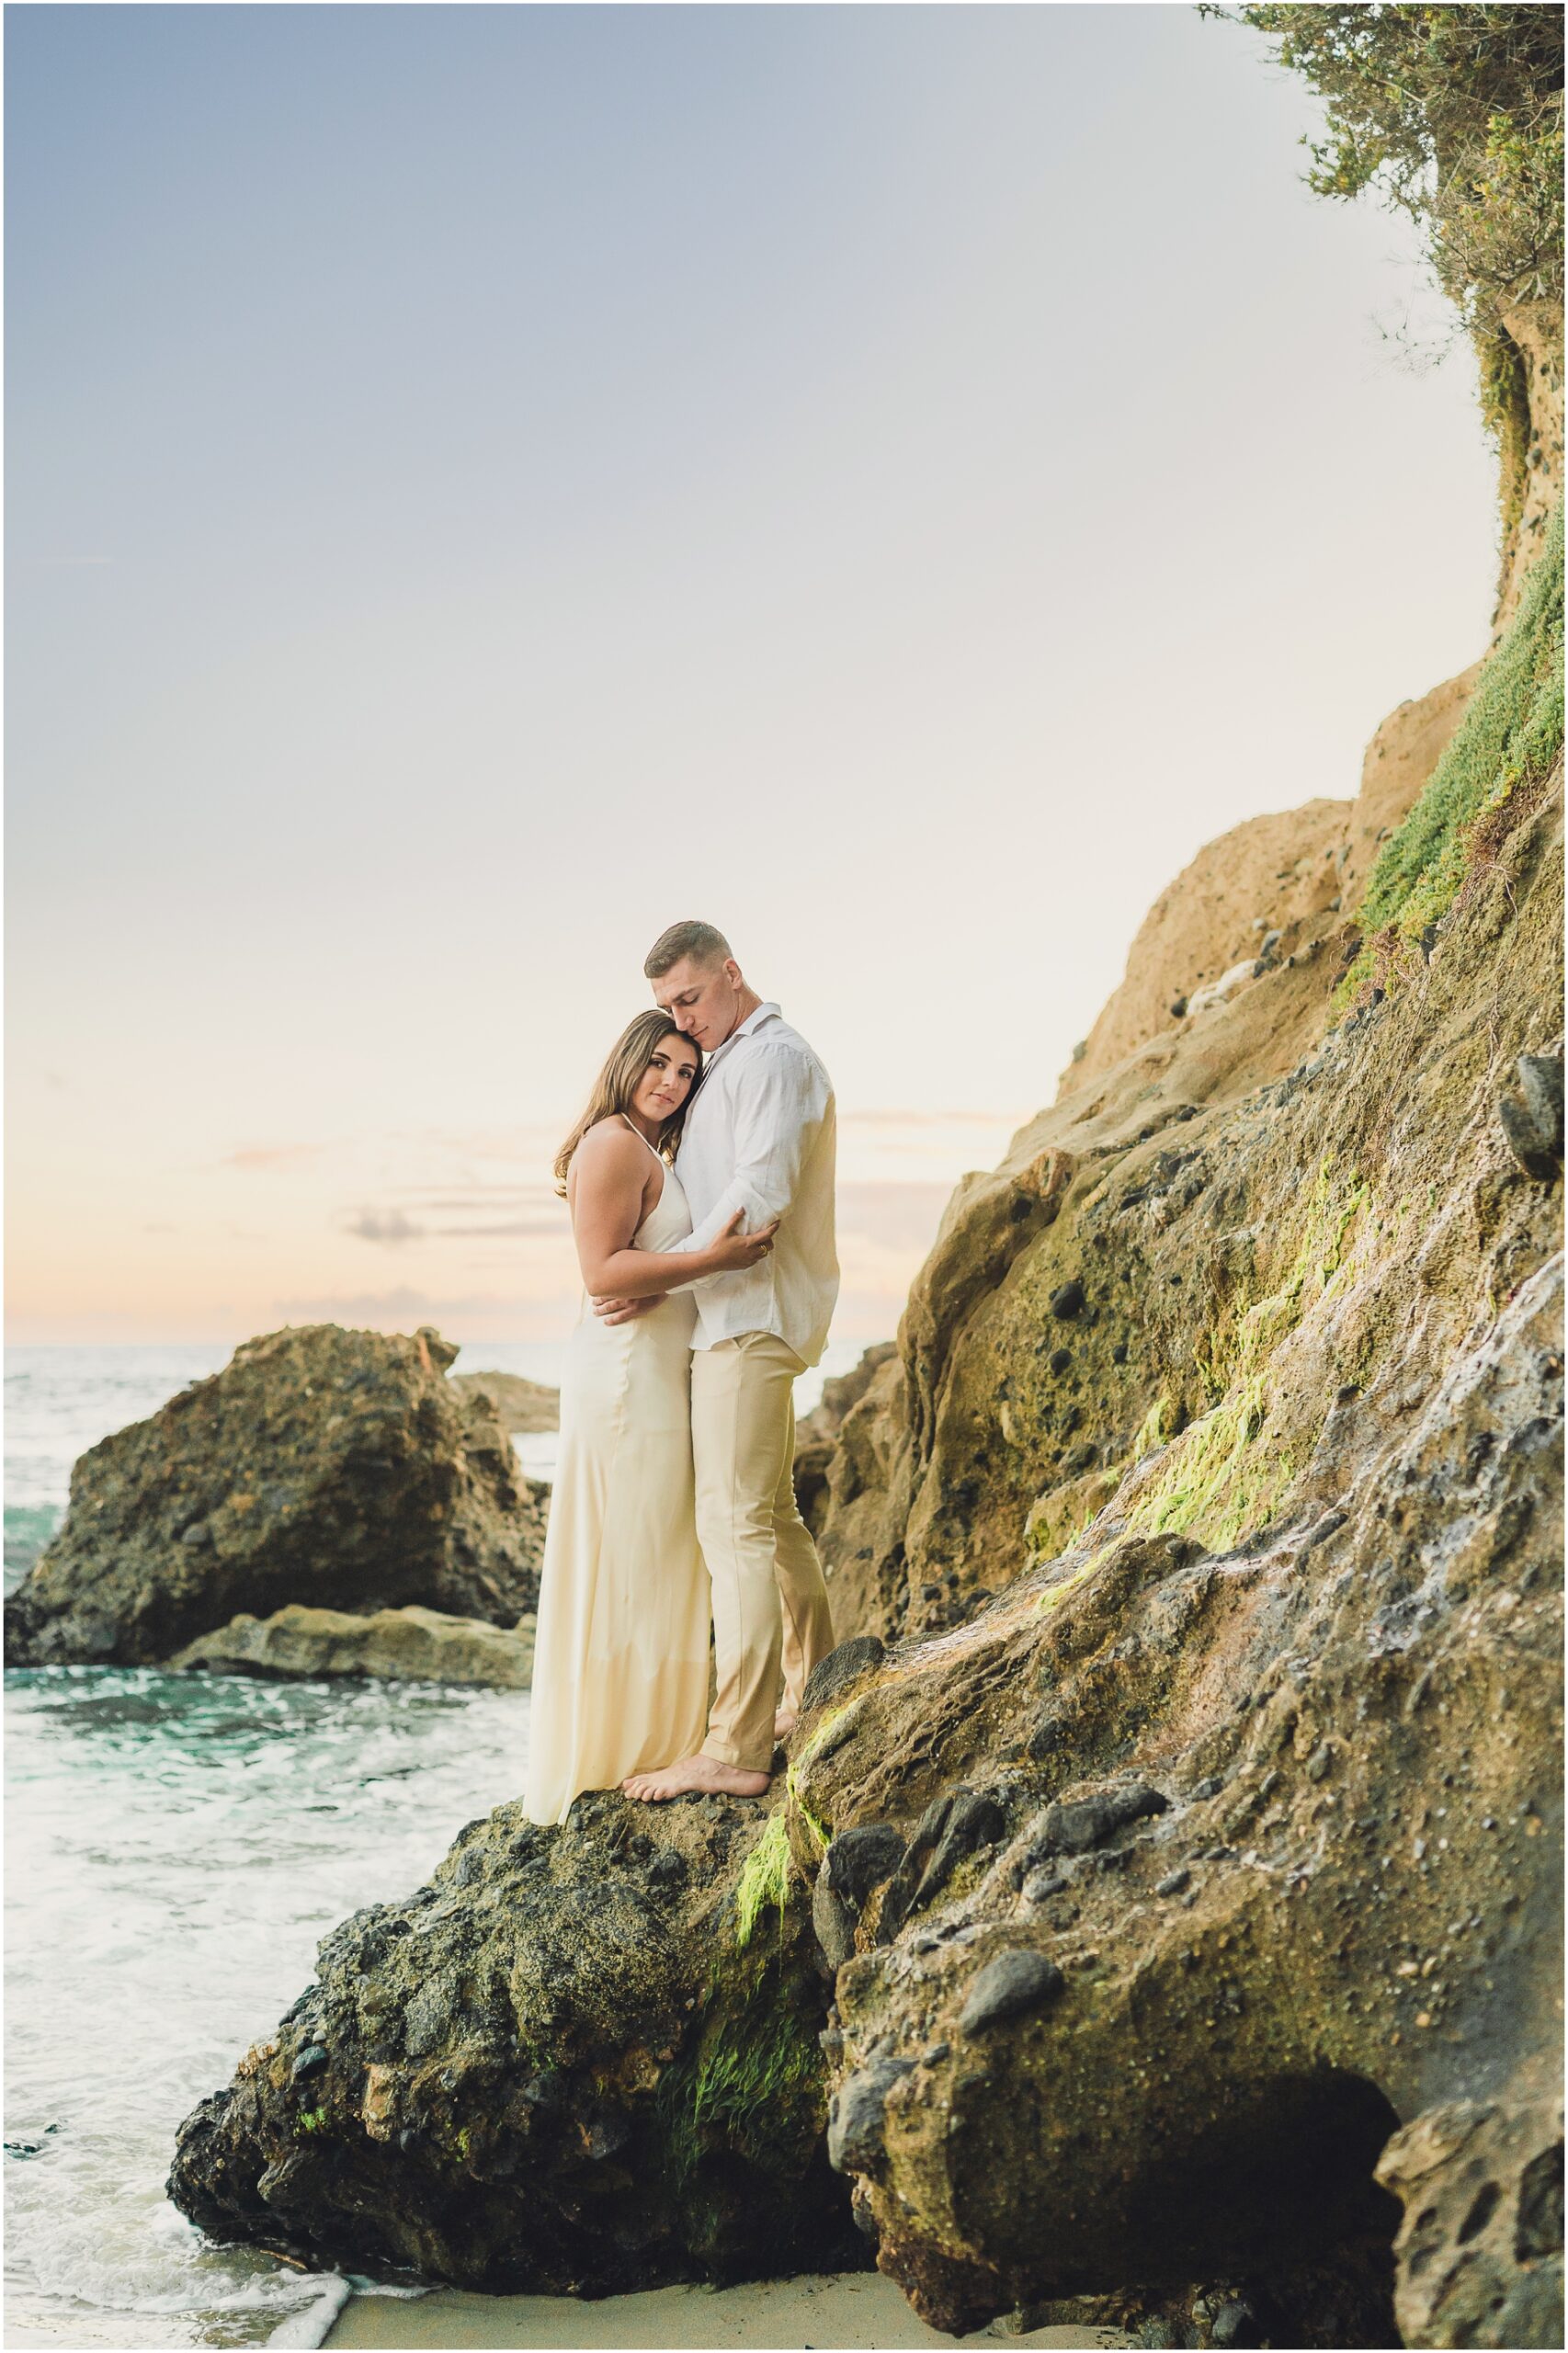 Couples portrait at Woods Cove in Laguna Beach featuring a woman leaning into a man while standing on a rocky outcropping over the ocean